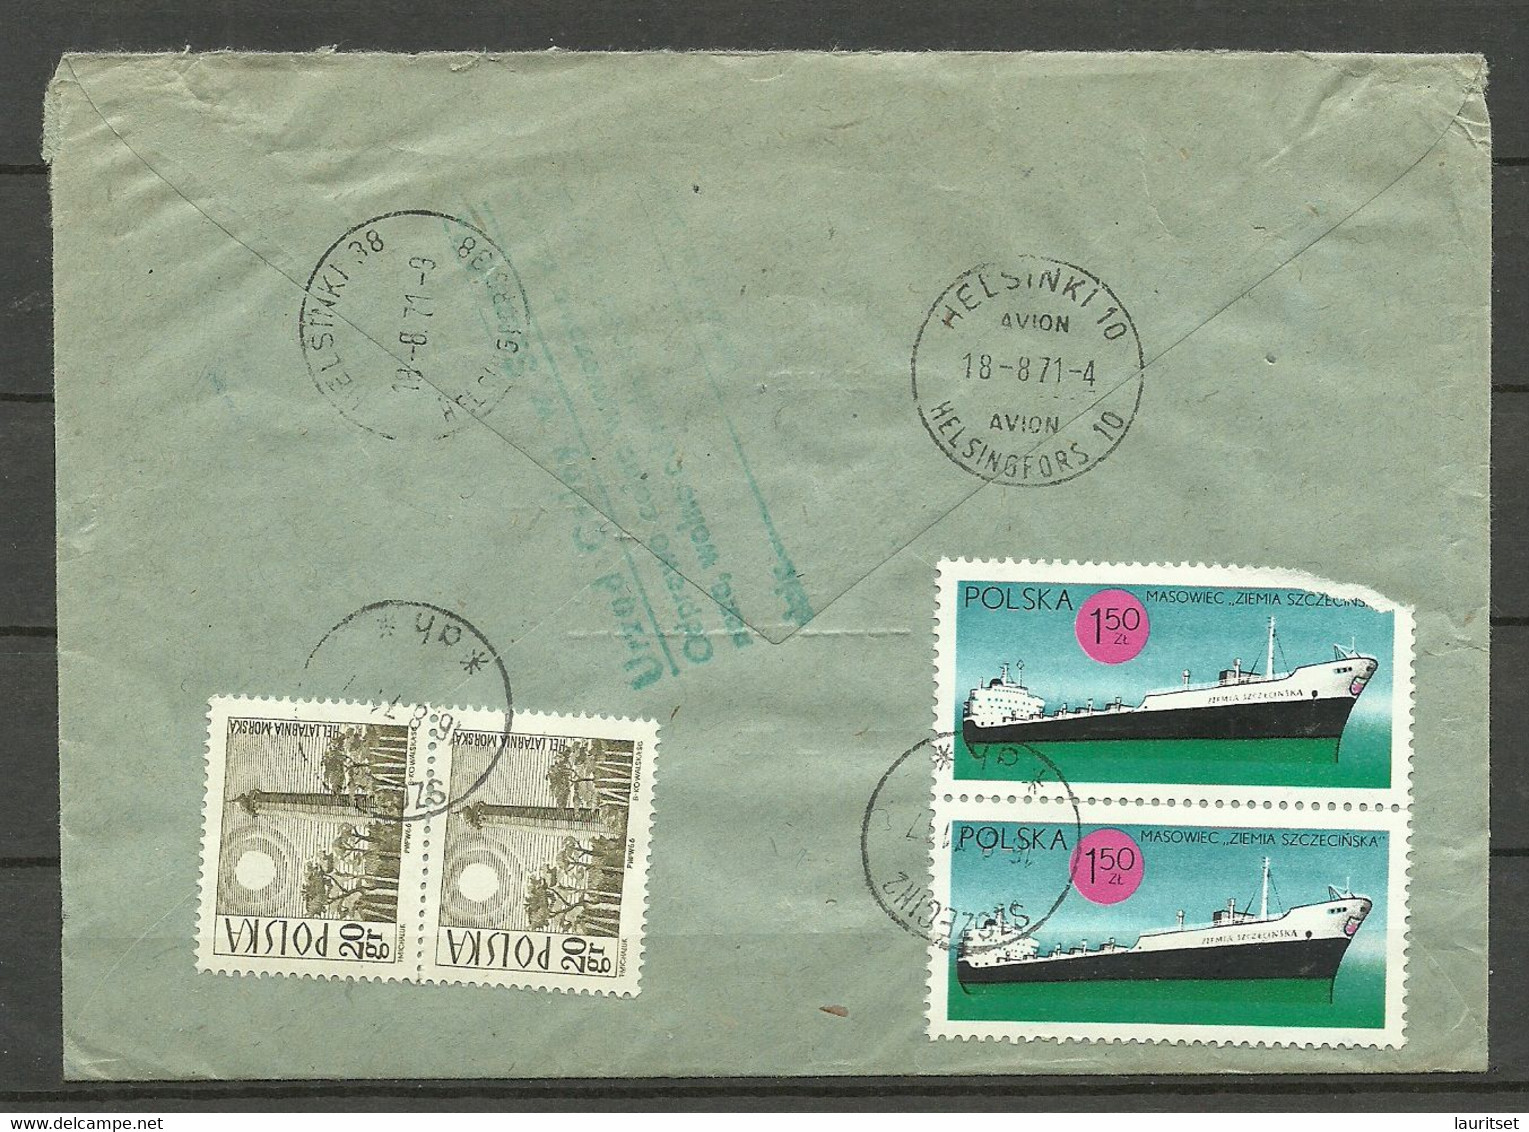 POLAND 1971 Registered Commercial Air Mail Cover To Finland Stockmann Department Store - Flugzeuge